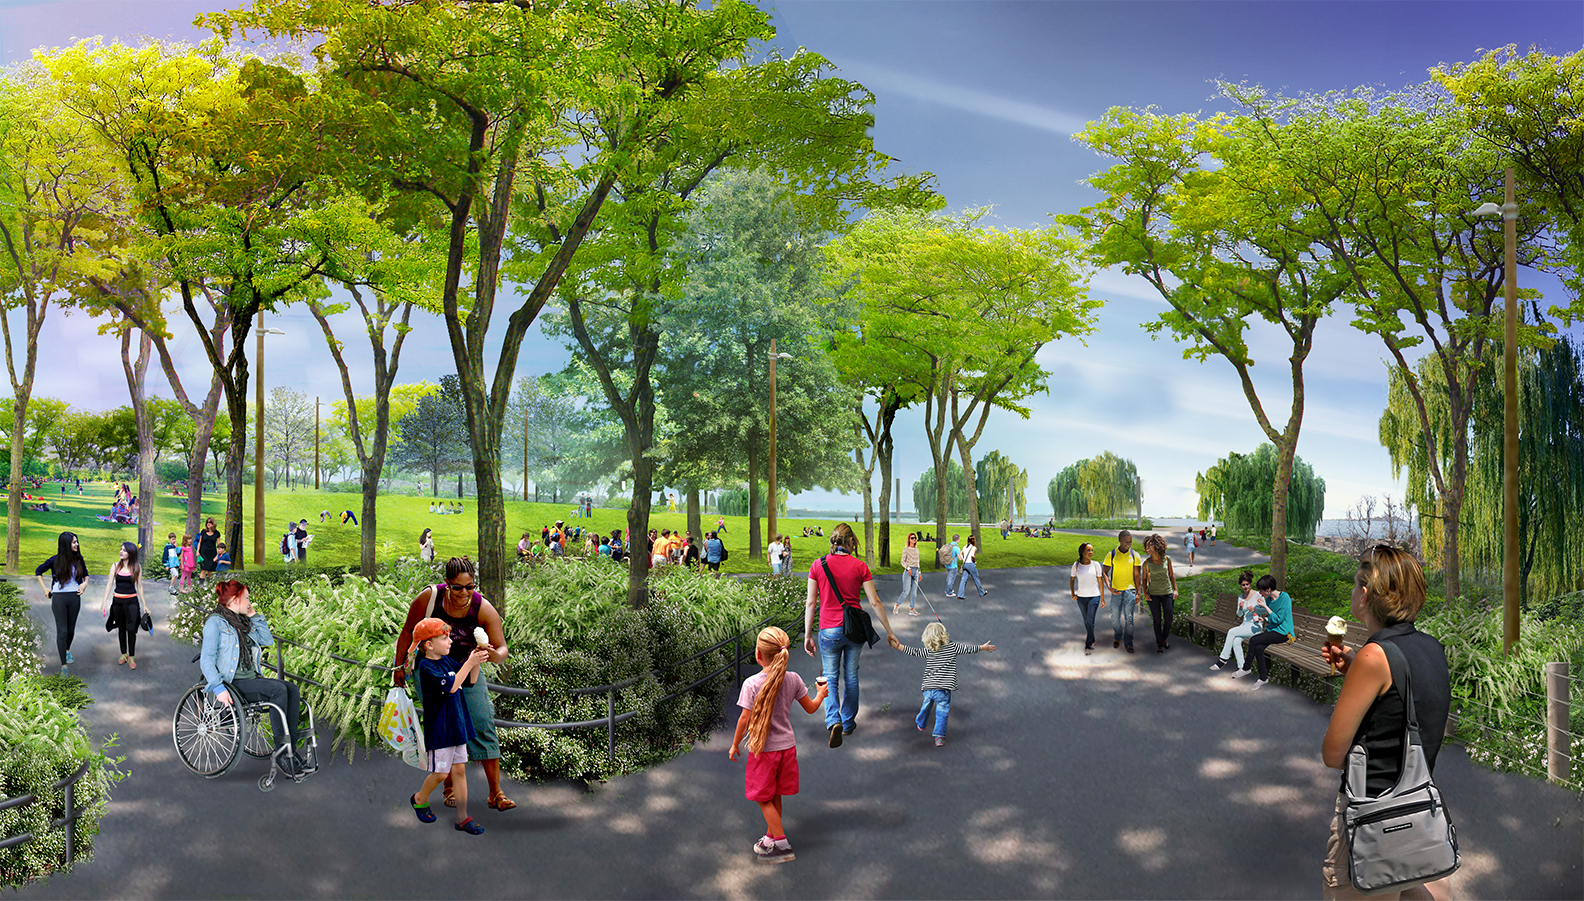 A rendering of promontory park south, people walk on a wide pathway shaded by trees on either side.